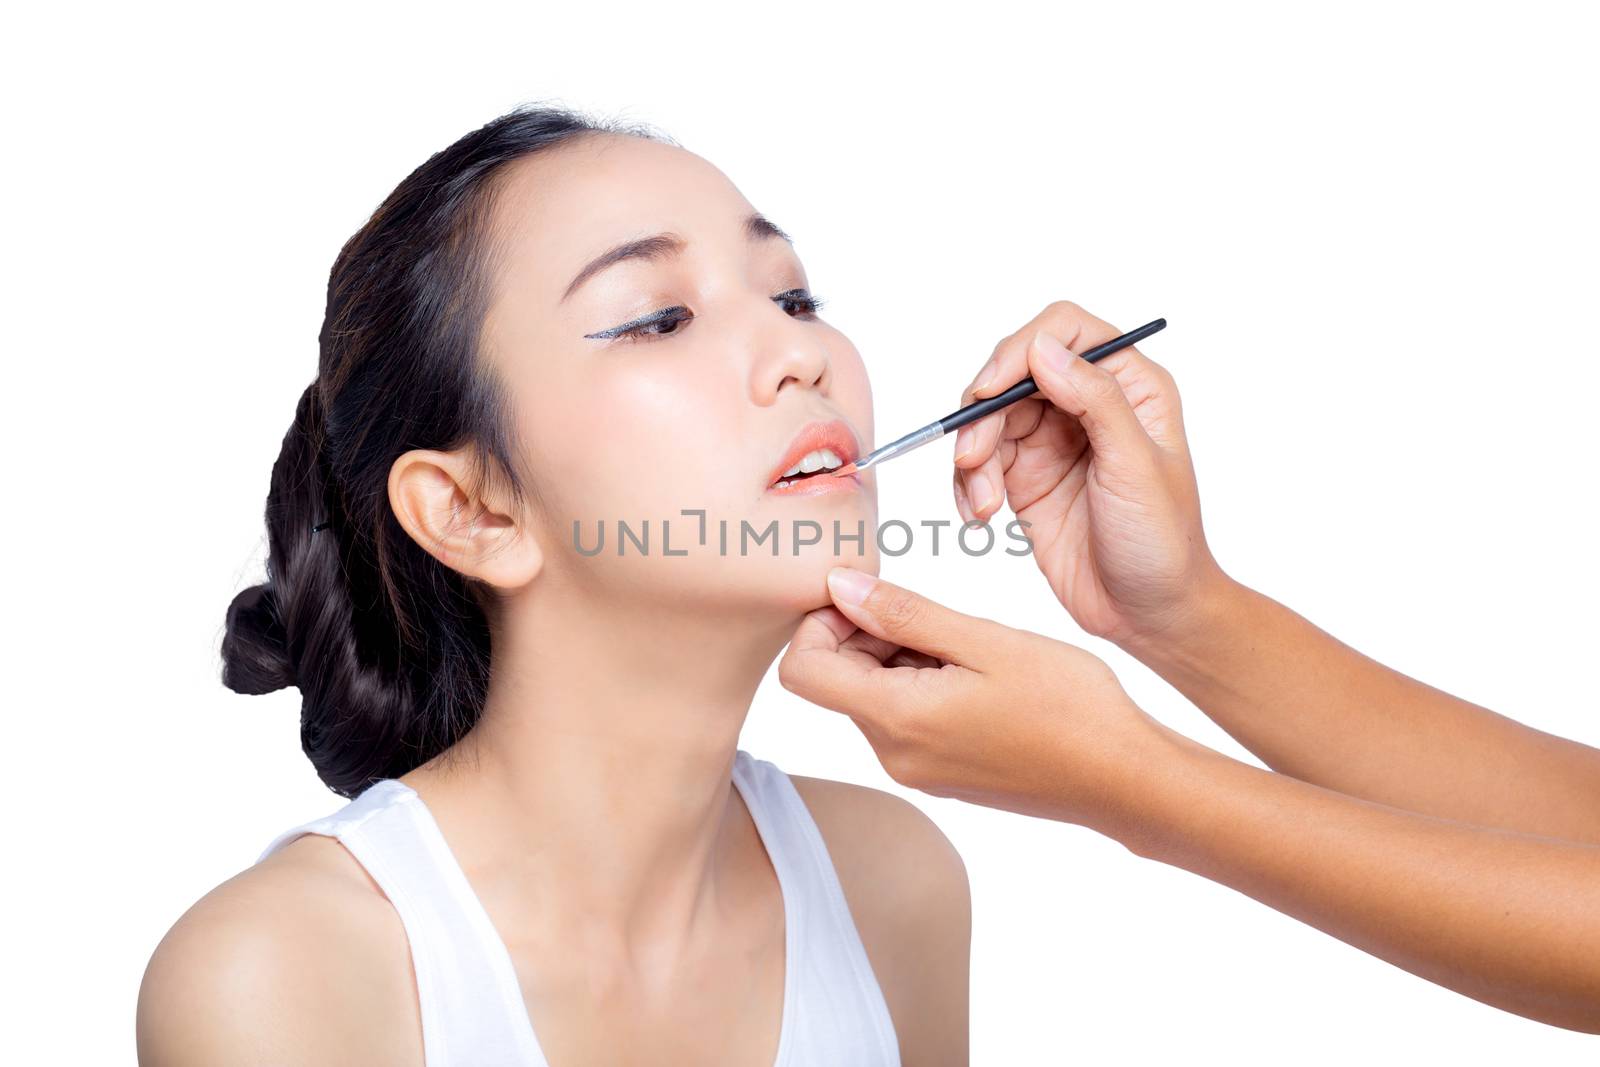 Beautiful Woman With Beauty Face, Sexy Full Lips Applying Lip Balm, Lipcare Stick On. Portrait Of Female Model With Natural Makeup. Lips Skin Care Cosmetics Concept. High Resolution